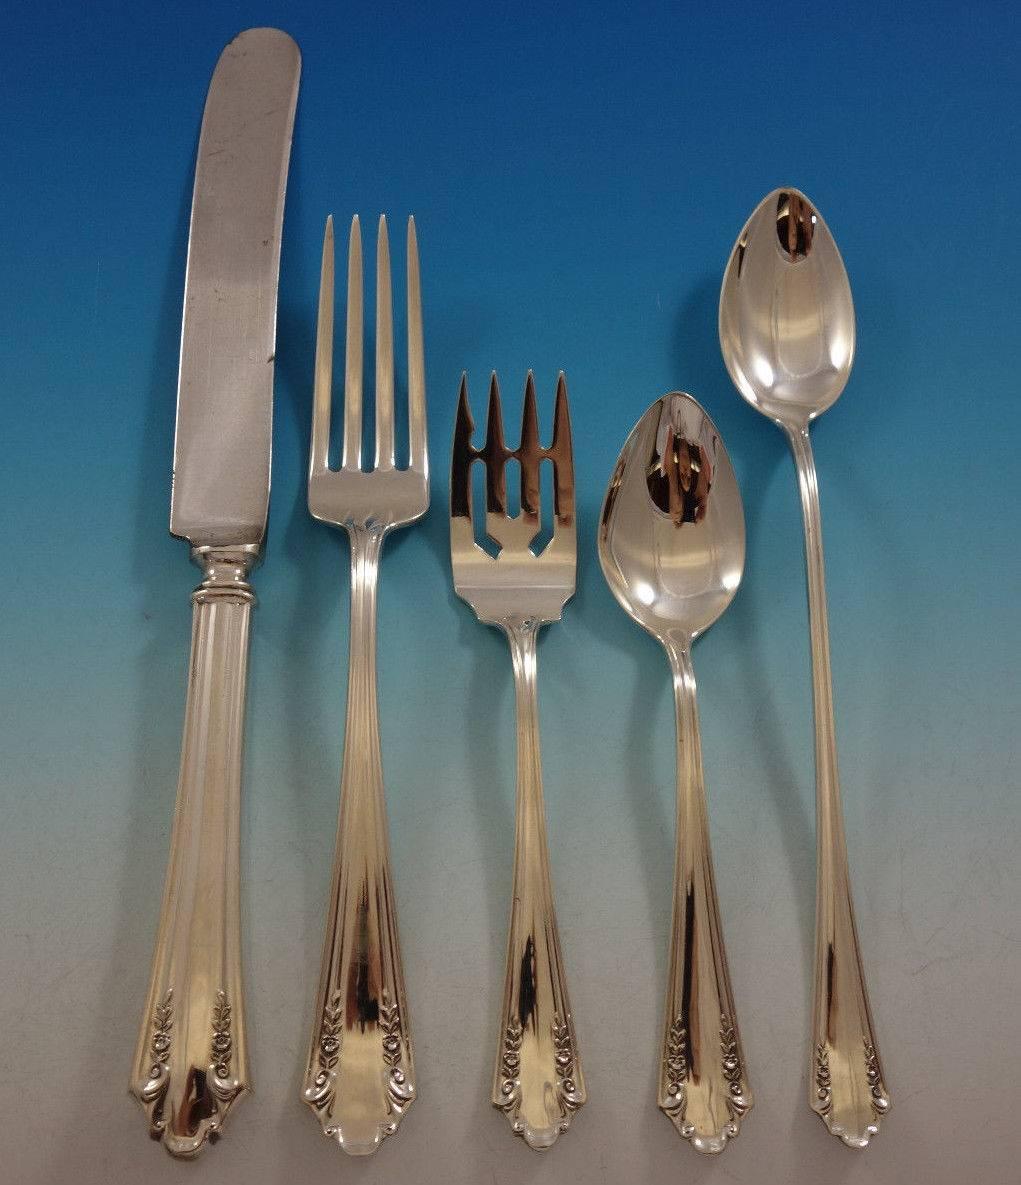 Shenandoah by Alvin sterling silver flatware set, 66 pieces. This set includes: 

12 dinner knives, 10